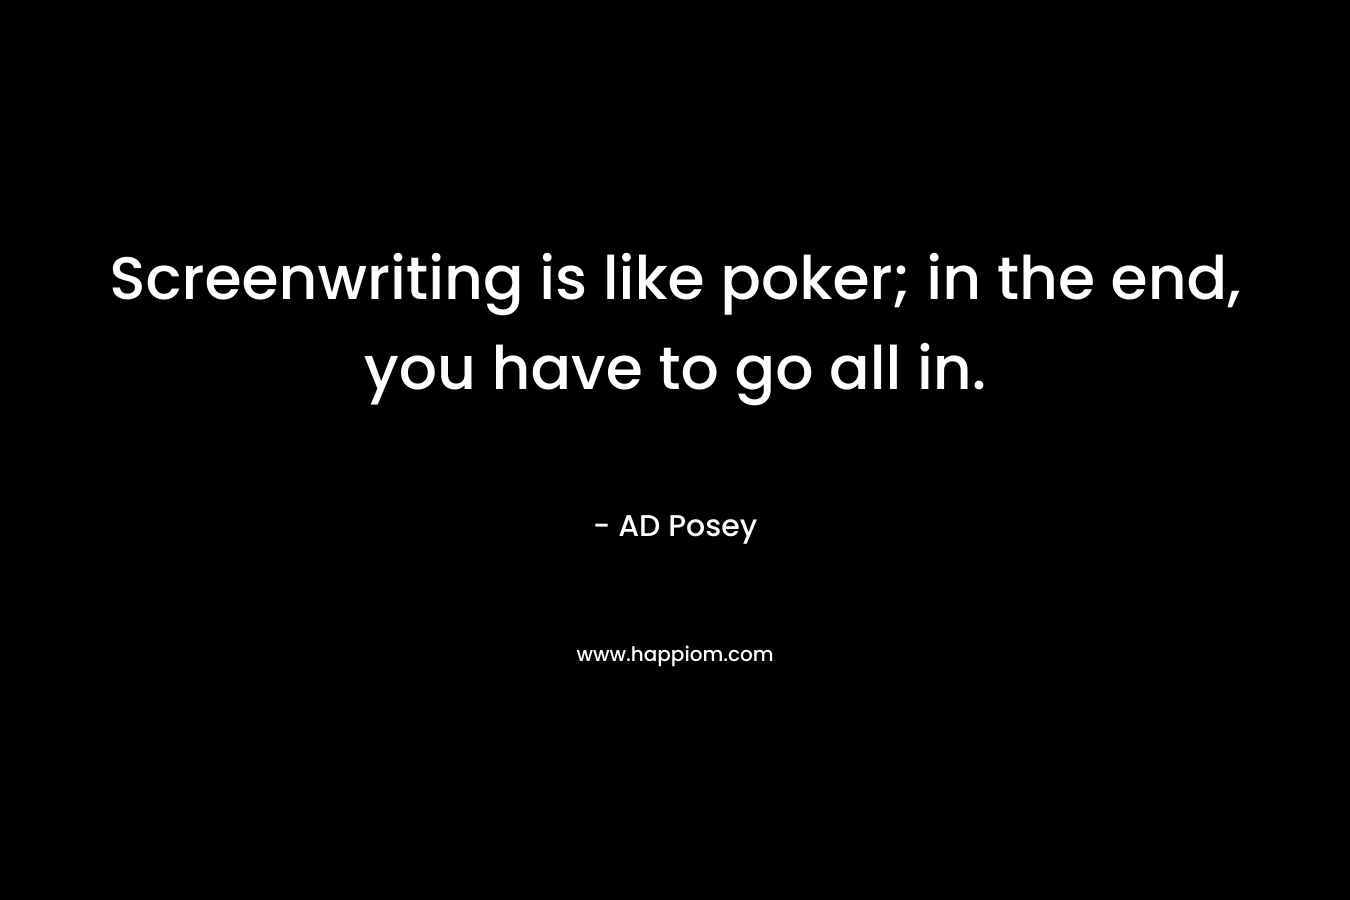 Screenwriting is like poker; in the end, you have to go all in.